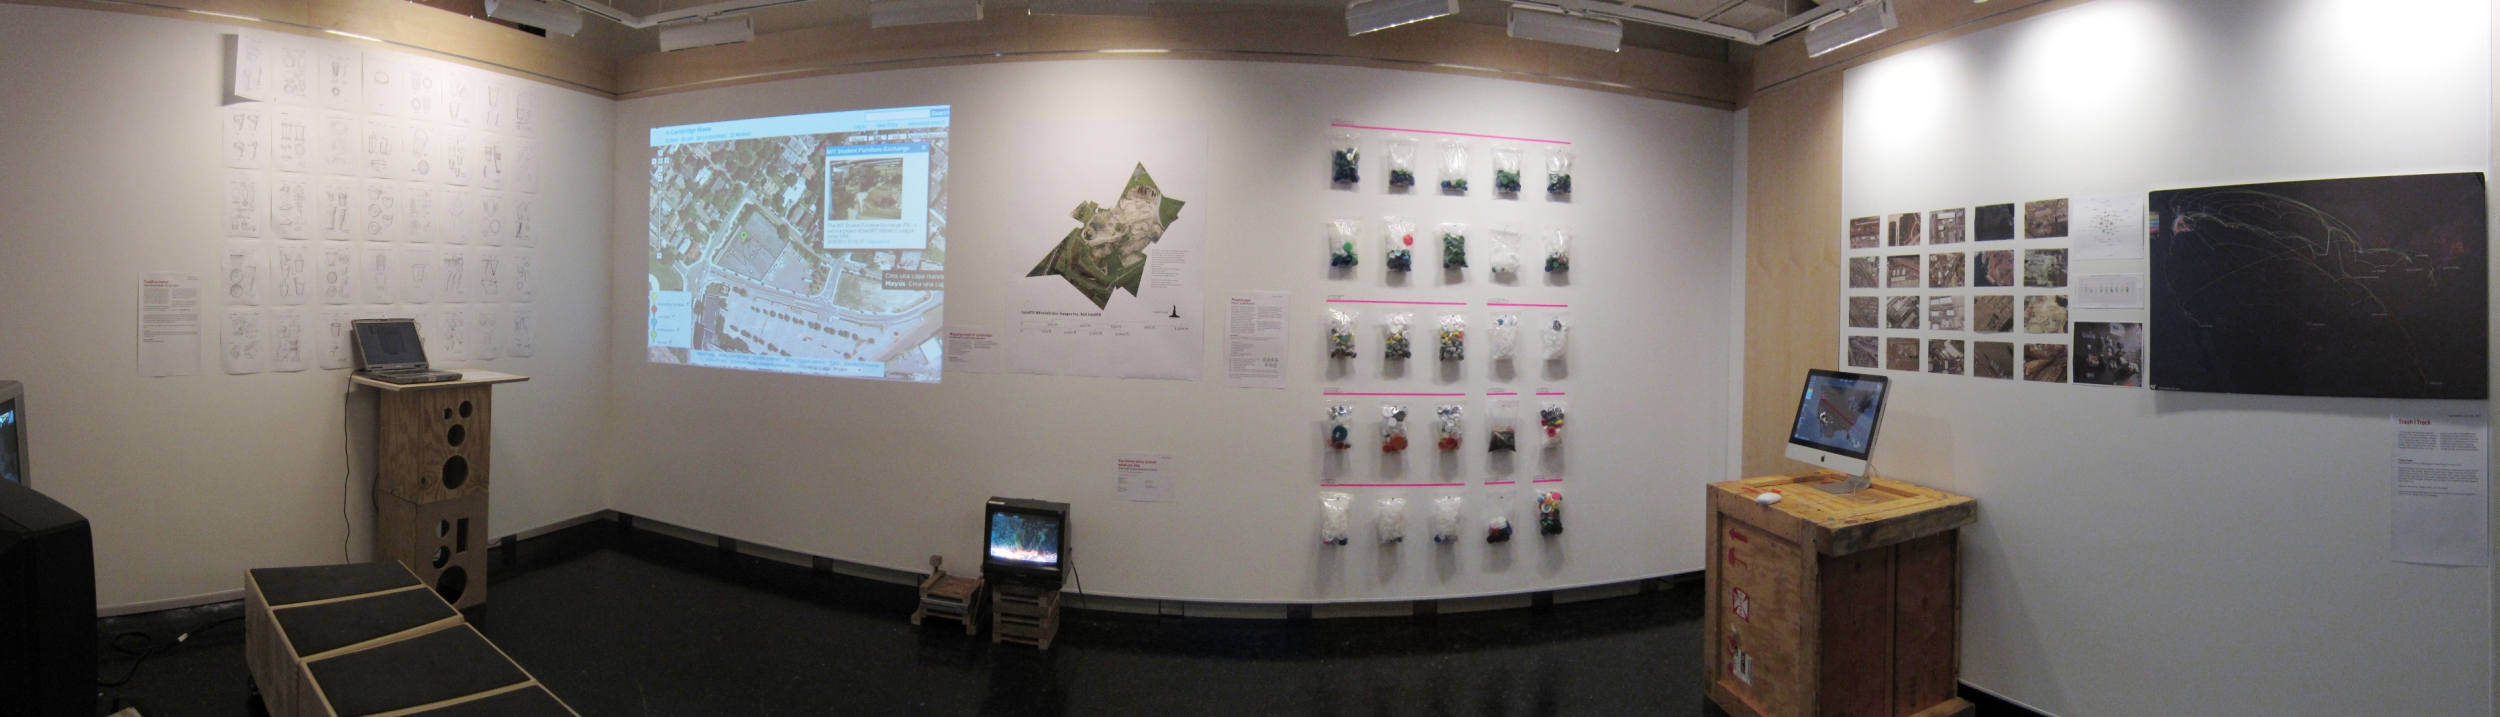 Panorama photo of the Trans Trash exibition at MIT